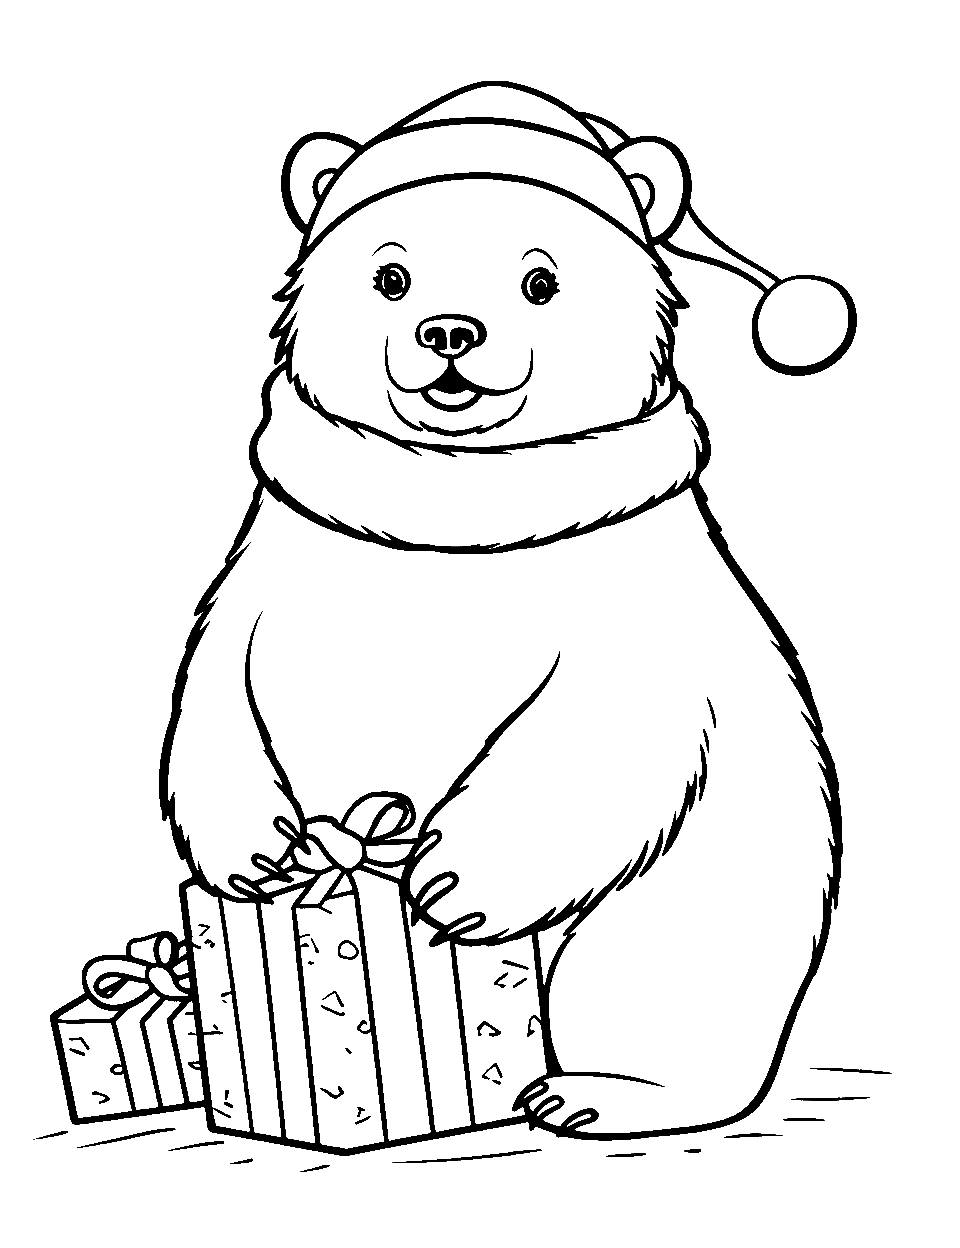 Christmas Bear Present Coloring Page - A bear wearing a Santa hat, holding a wrapped present celebrating Christmas.